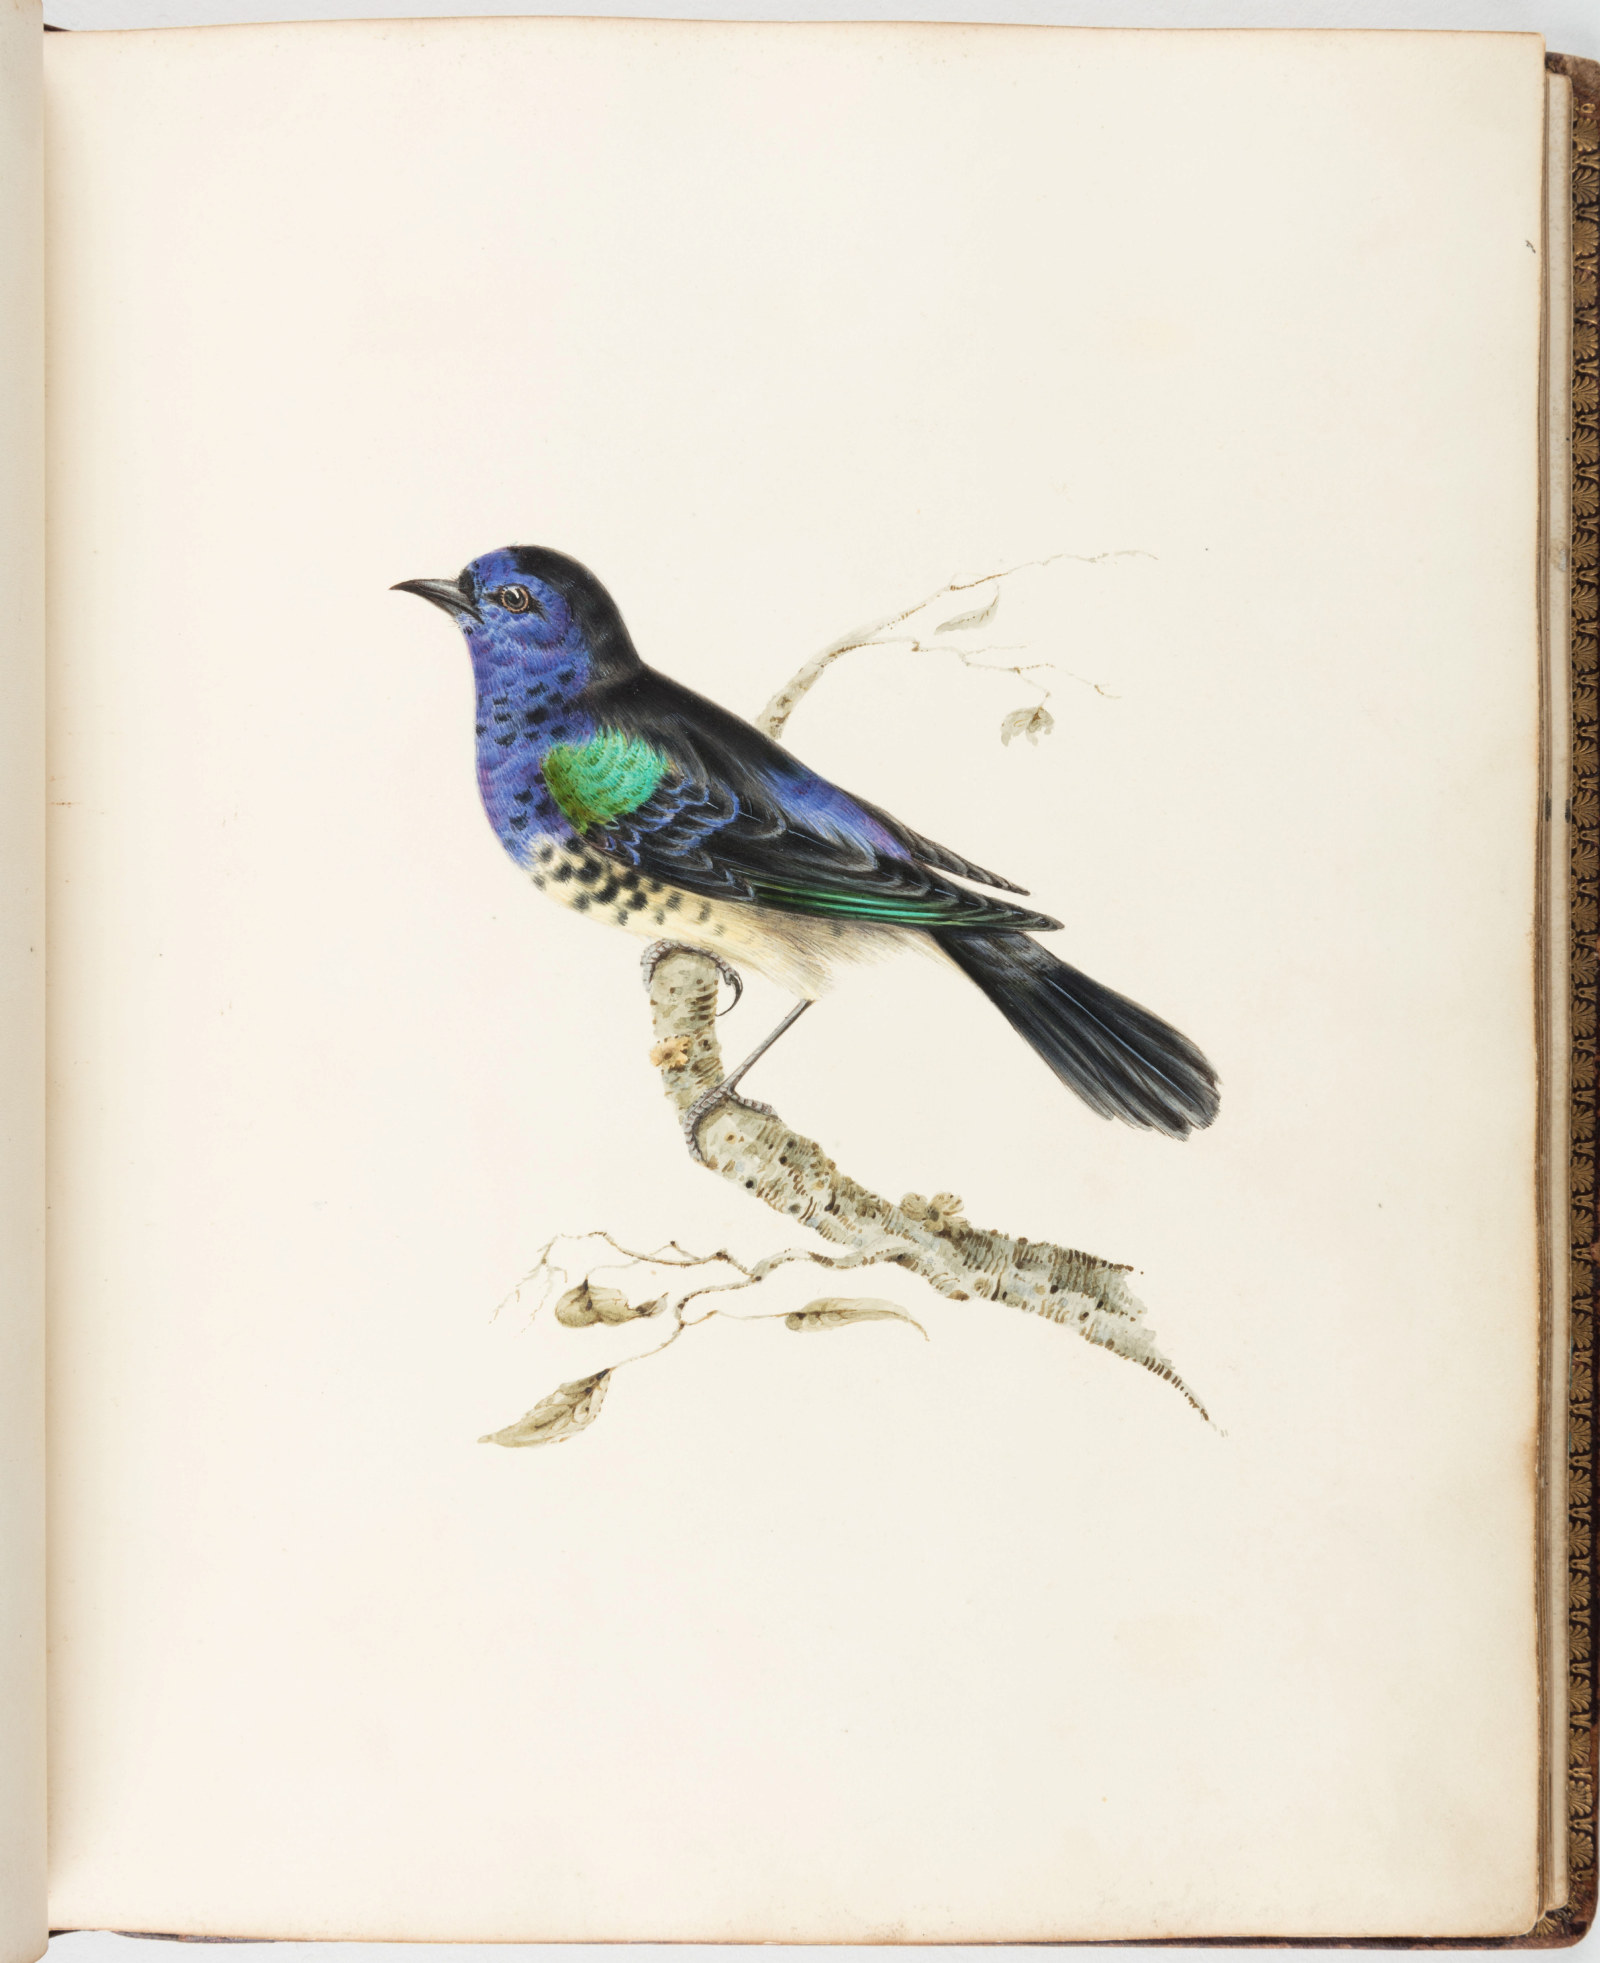 Illustration of a bird with blue and green feathers perched on a branch